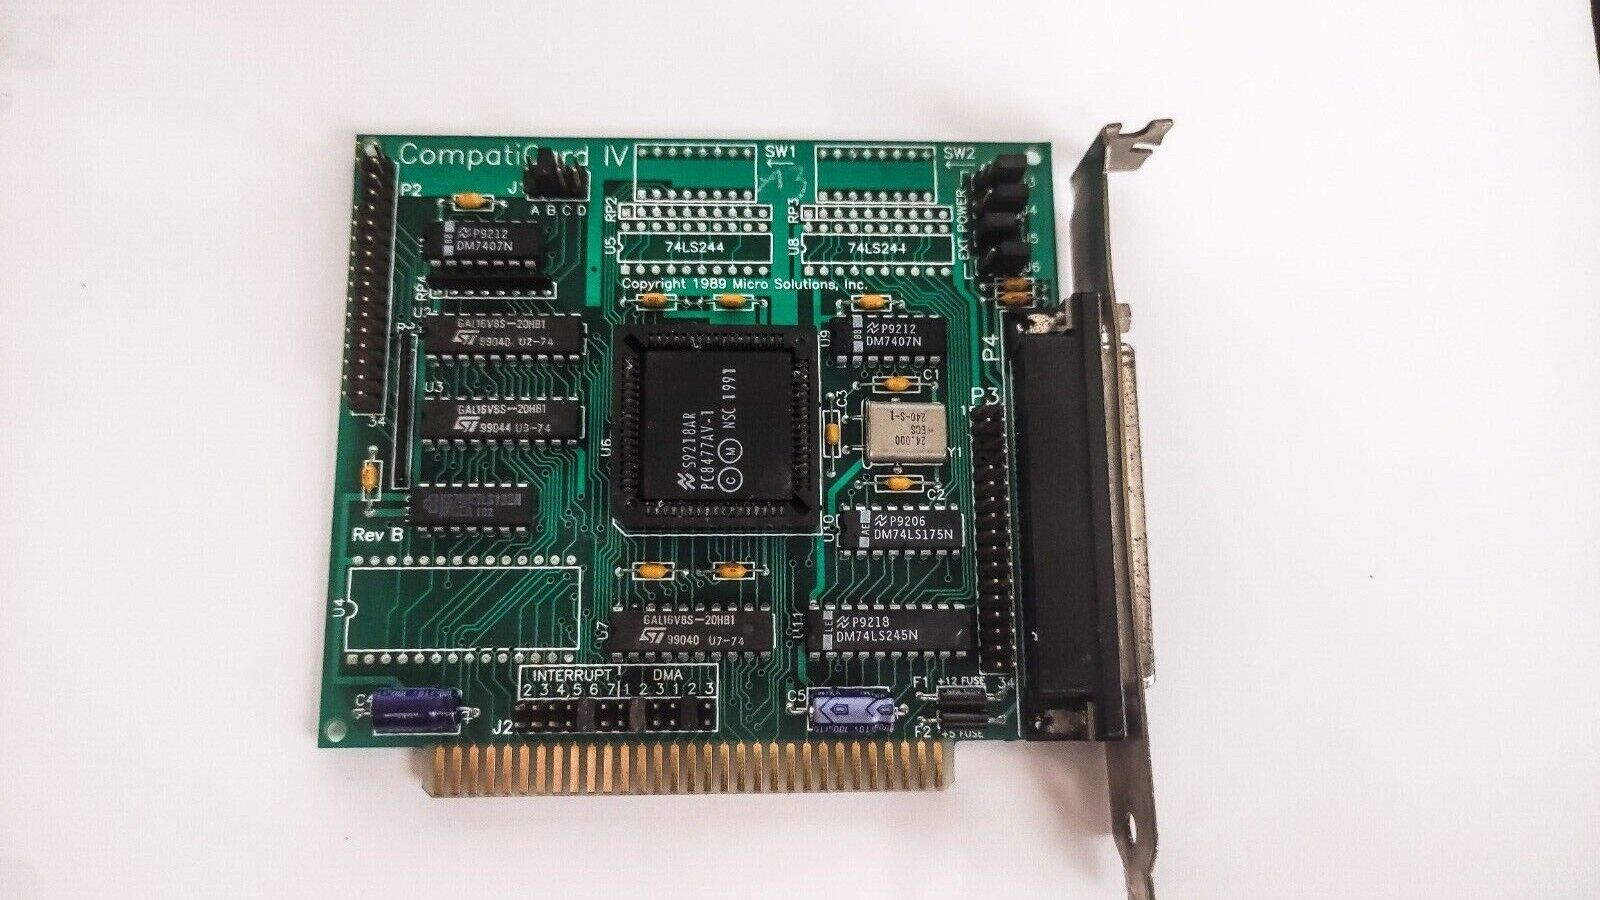 Rare MicroSolutions CompatiCard IV Floppy Disk Controller Card - ISA